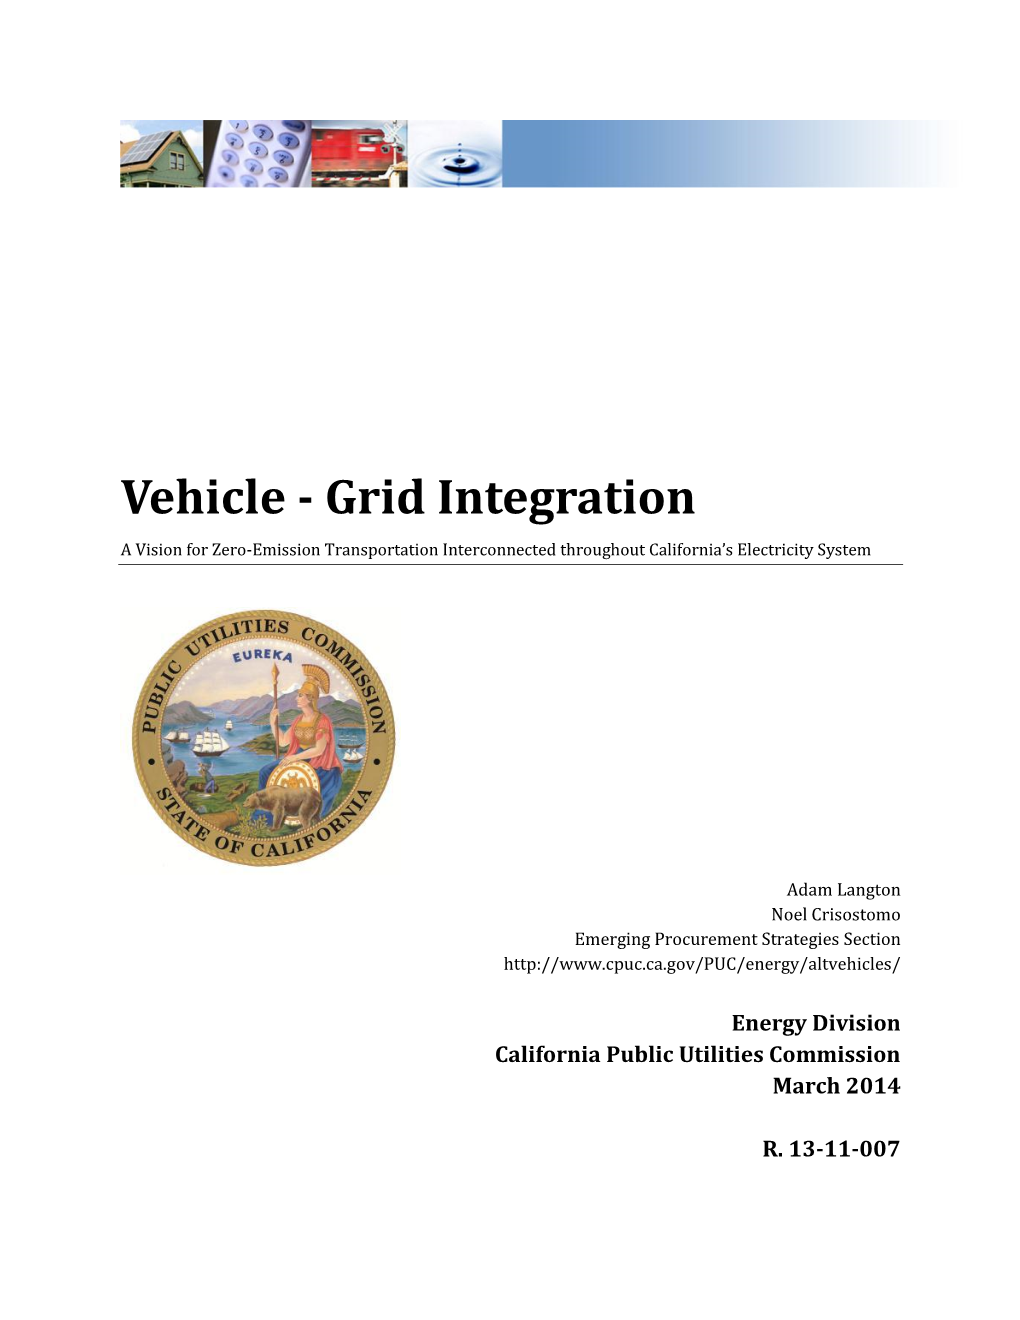 Vehicle - Grid Integration a Vision for Zero-Emission Transportation Interconnected Throughout California’S Electricity System